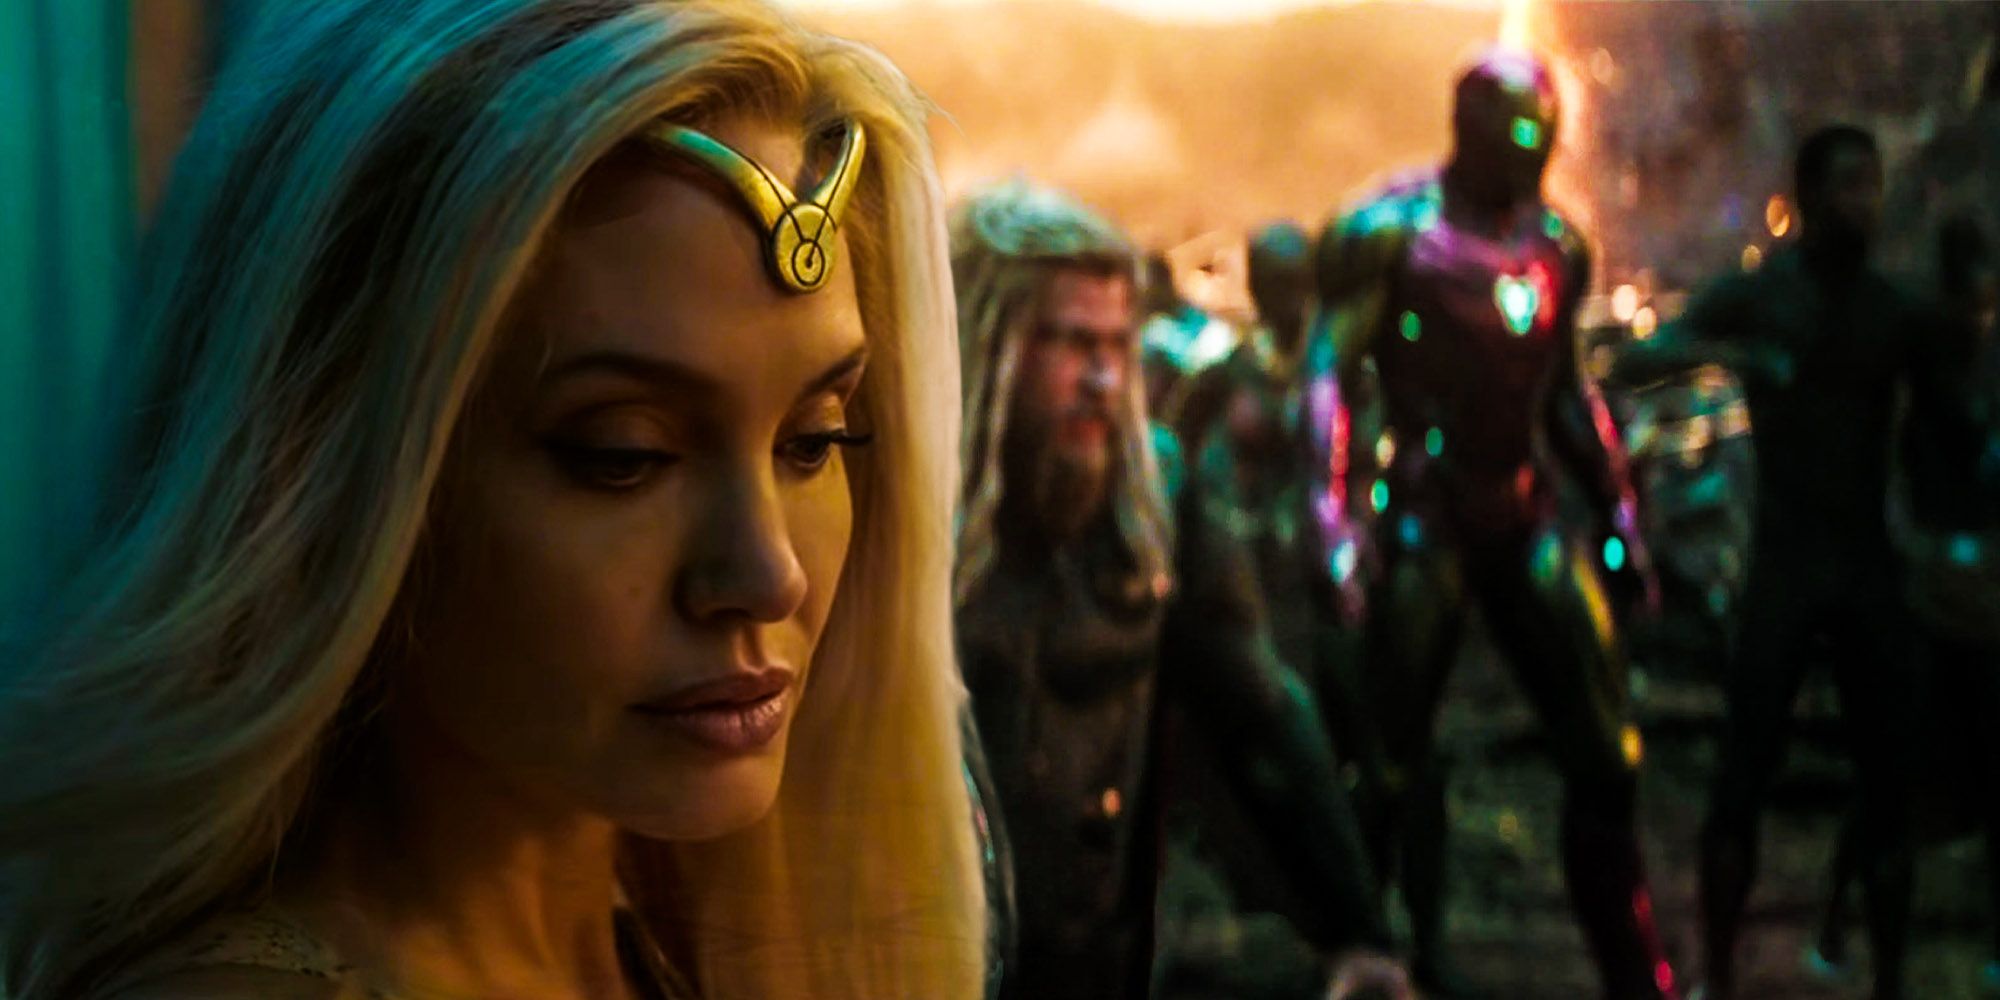 angelina jolie will The eternals Join the avengers phase 4